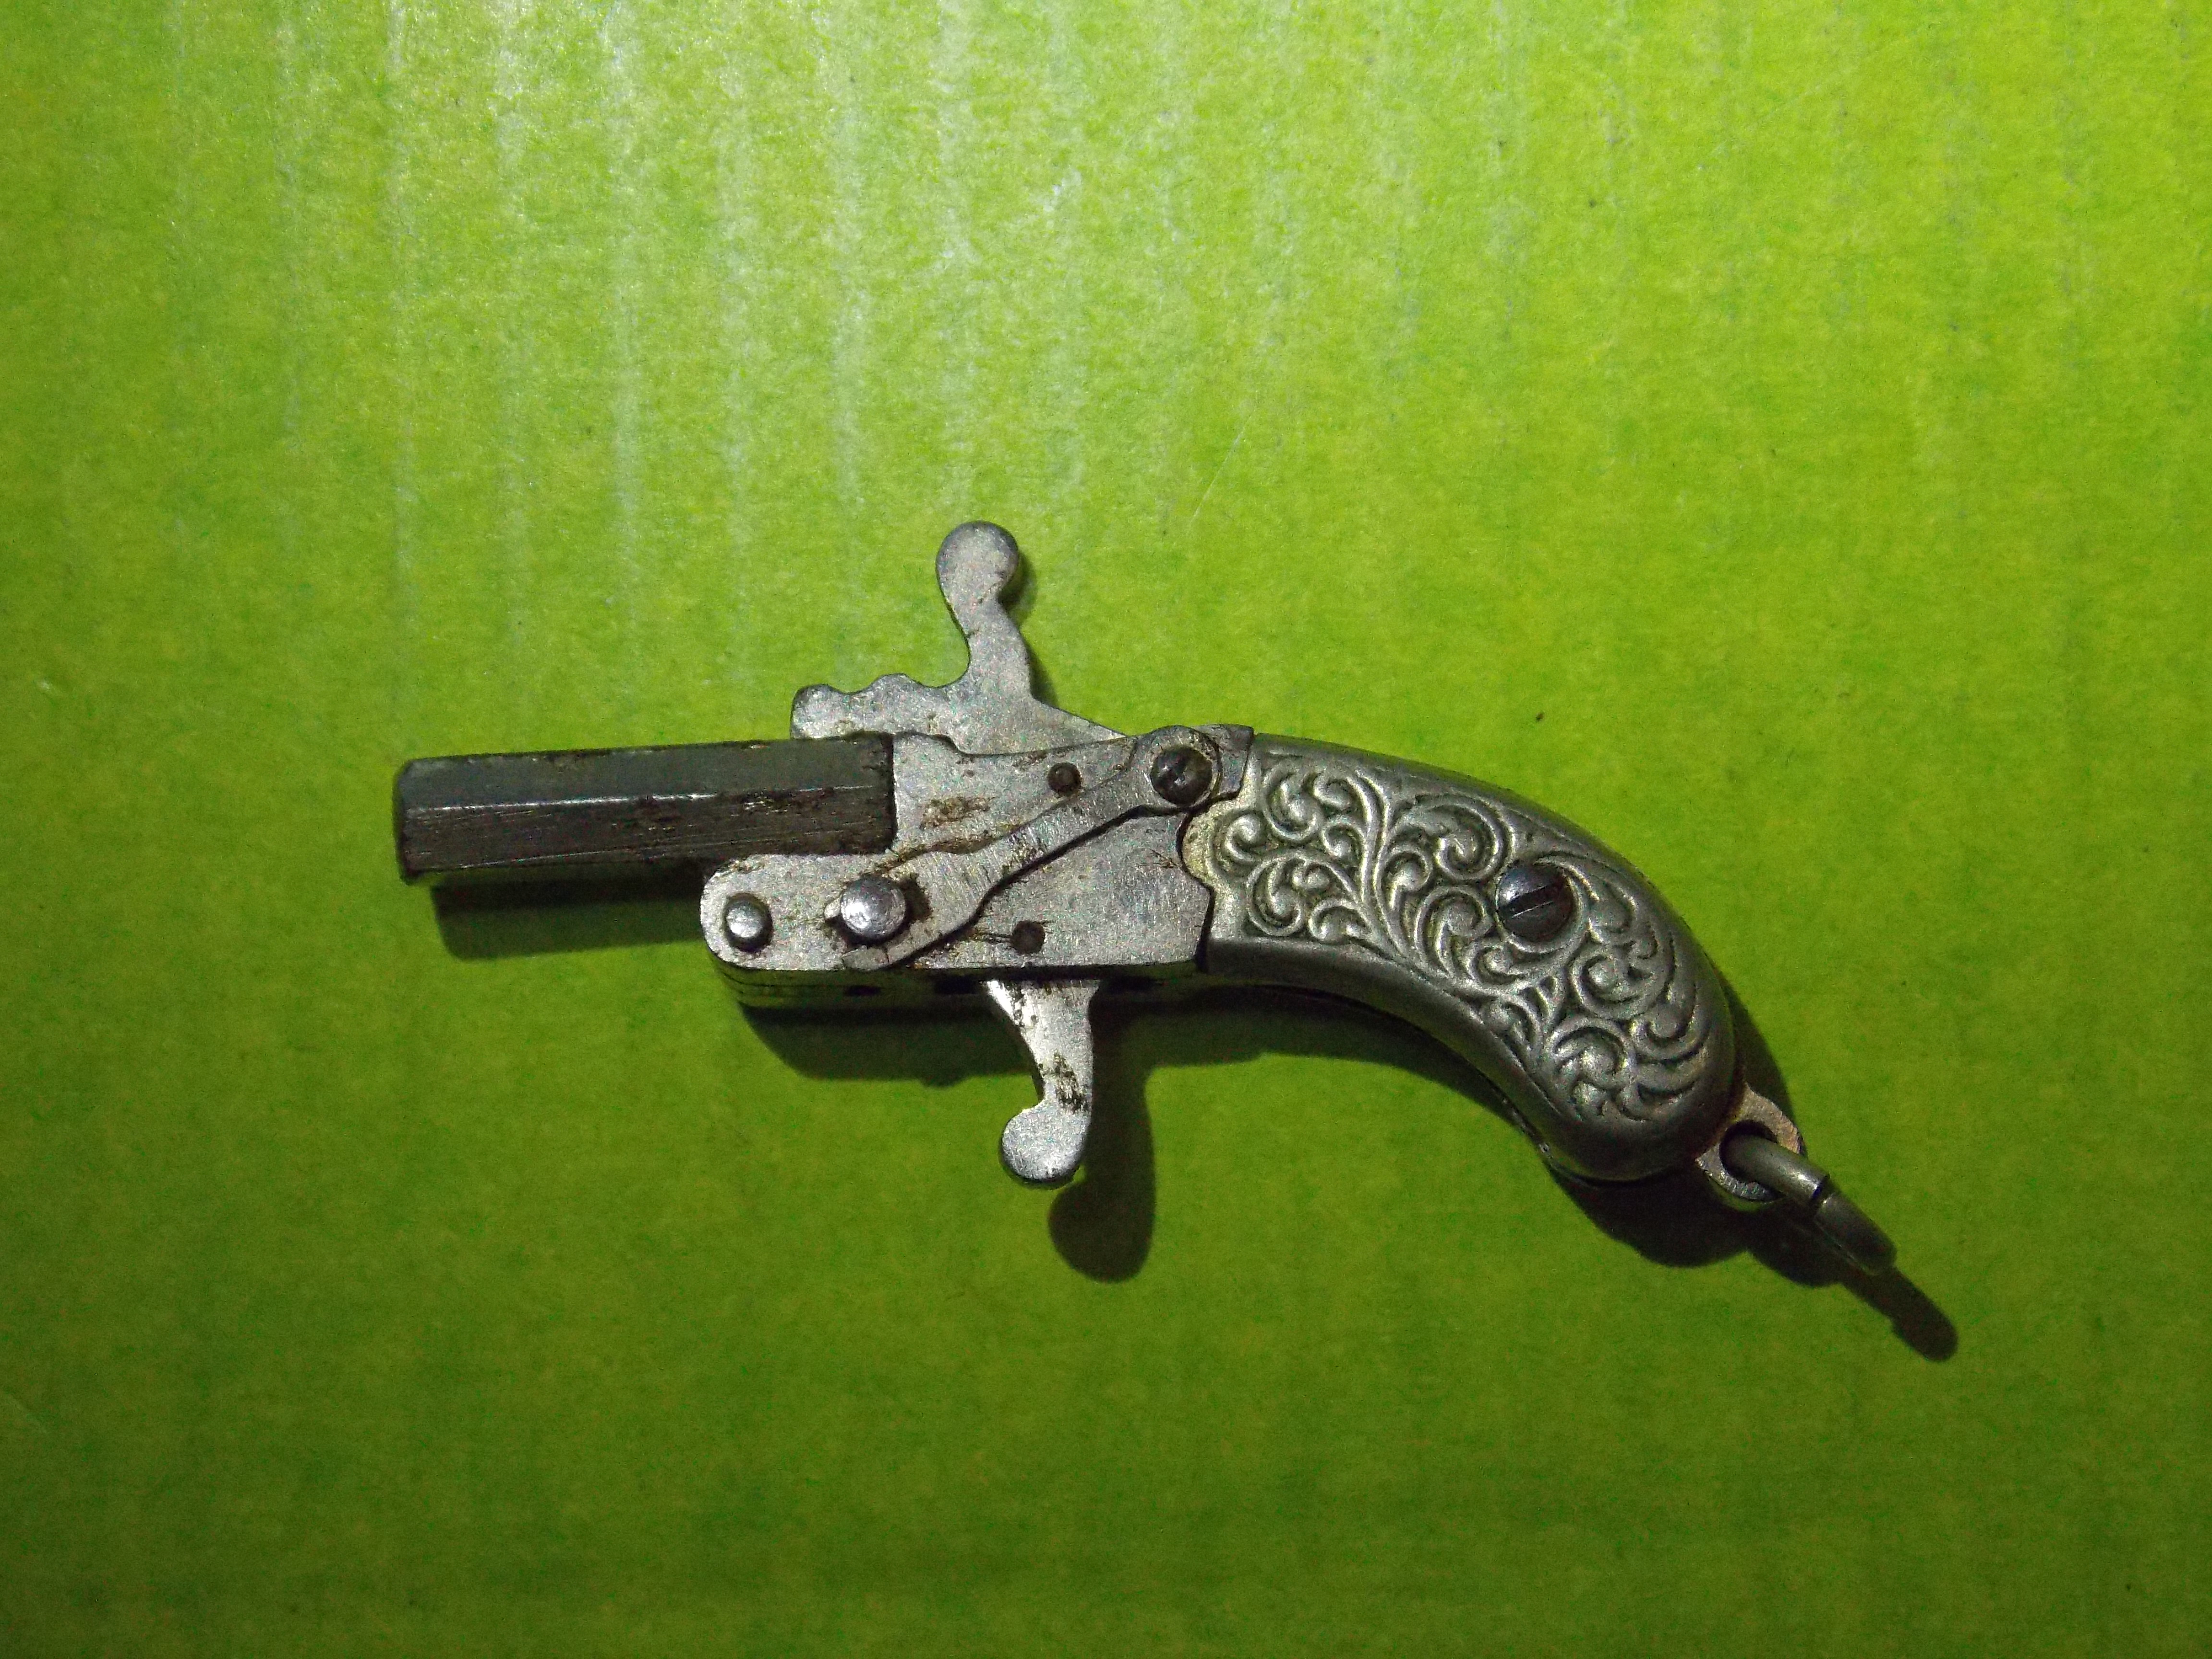 NOVELTY CHARM IN THE FORM OF A MUFF PISTOL - Image 2 of 2